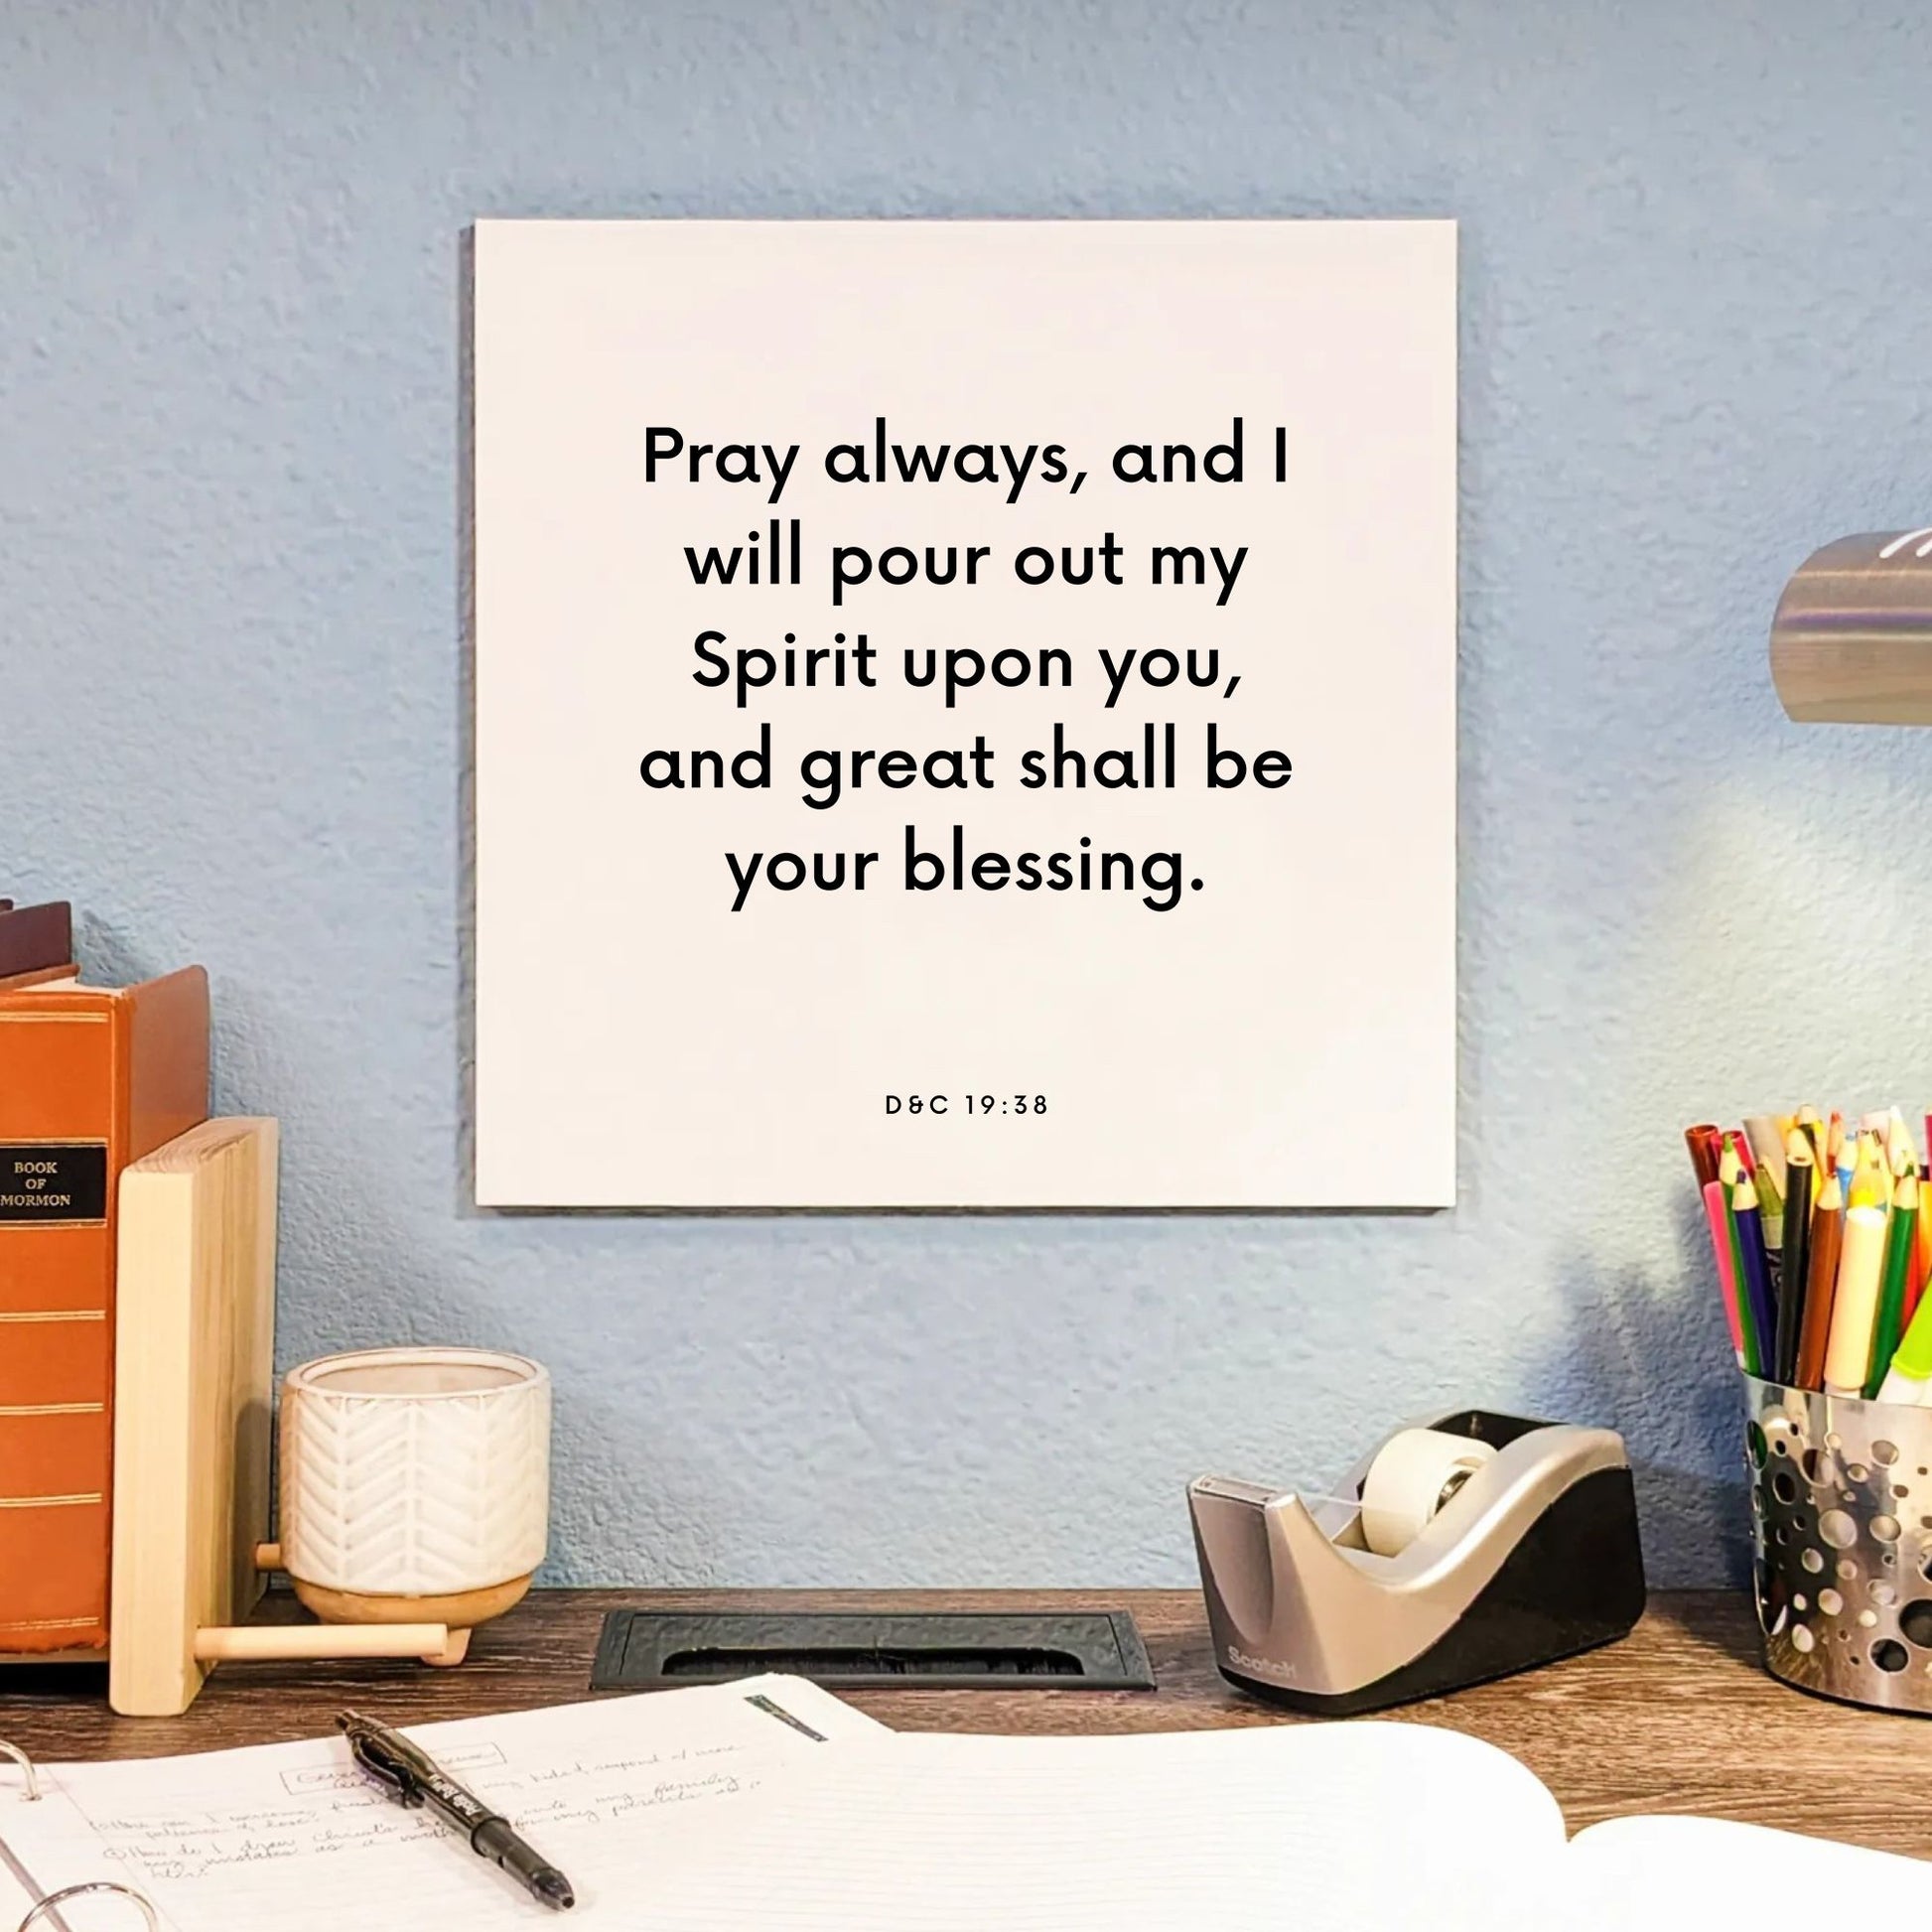 Desk mouting of the scripture tile for D&C 19:38 - "Pray always, and I will pour out my Spirit upon you"